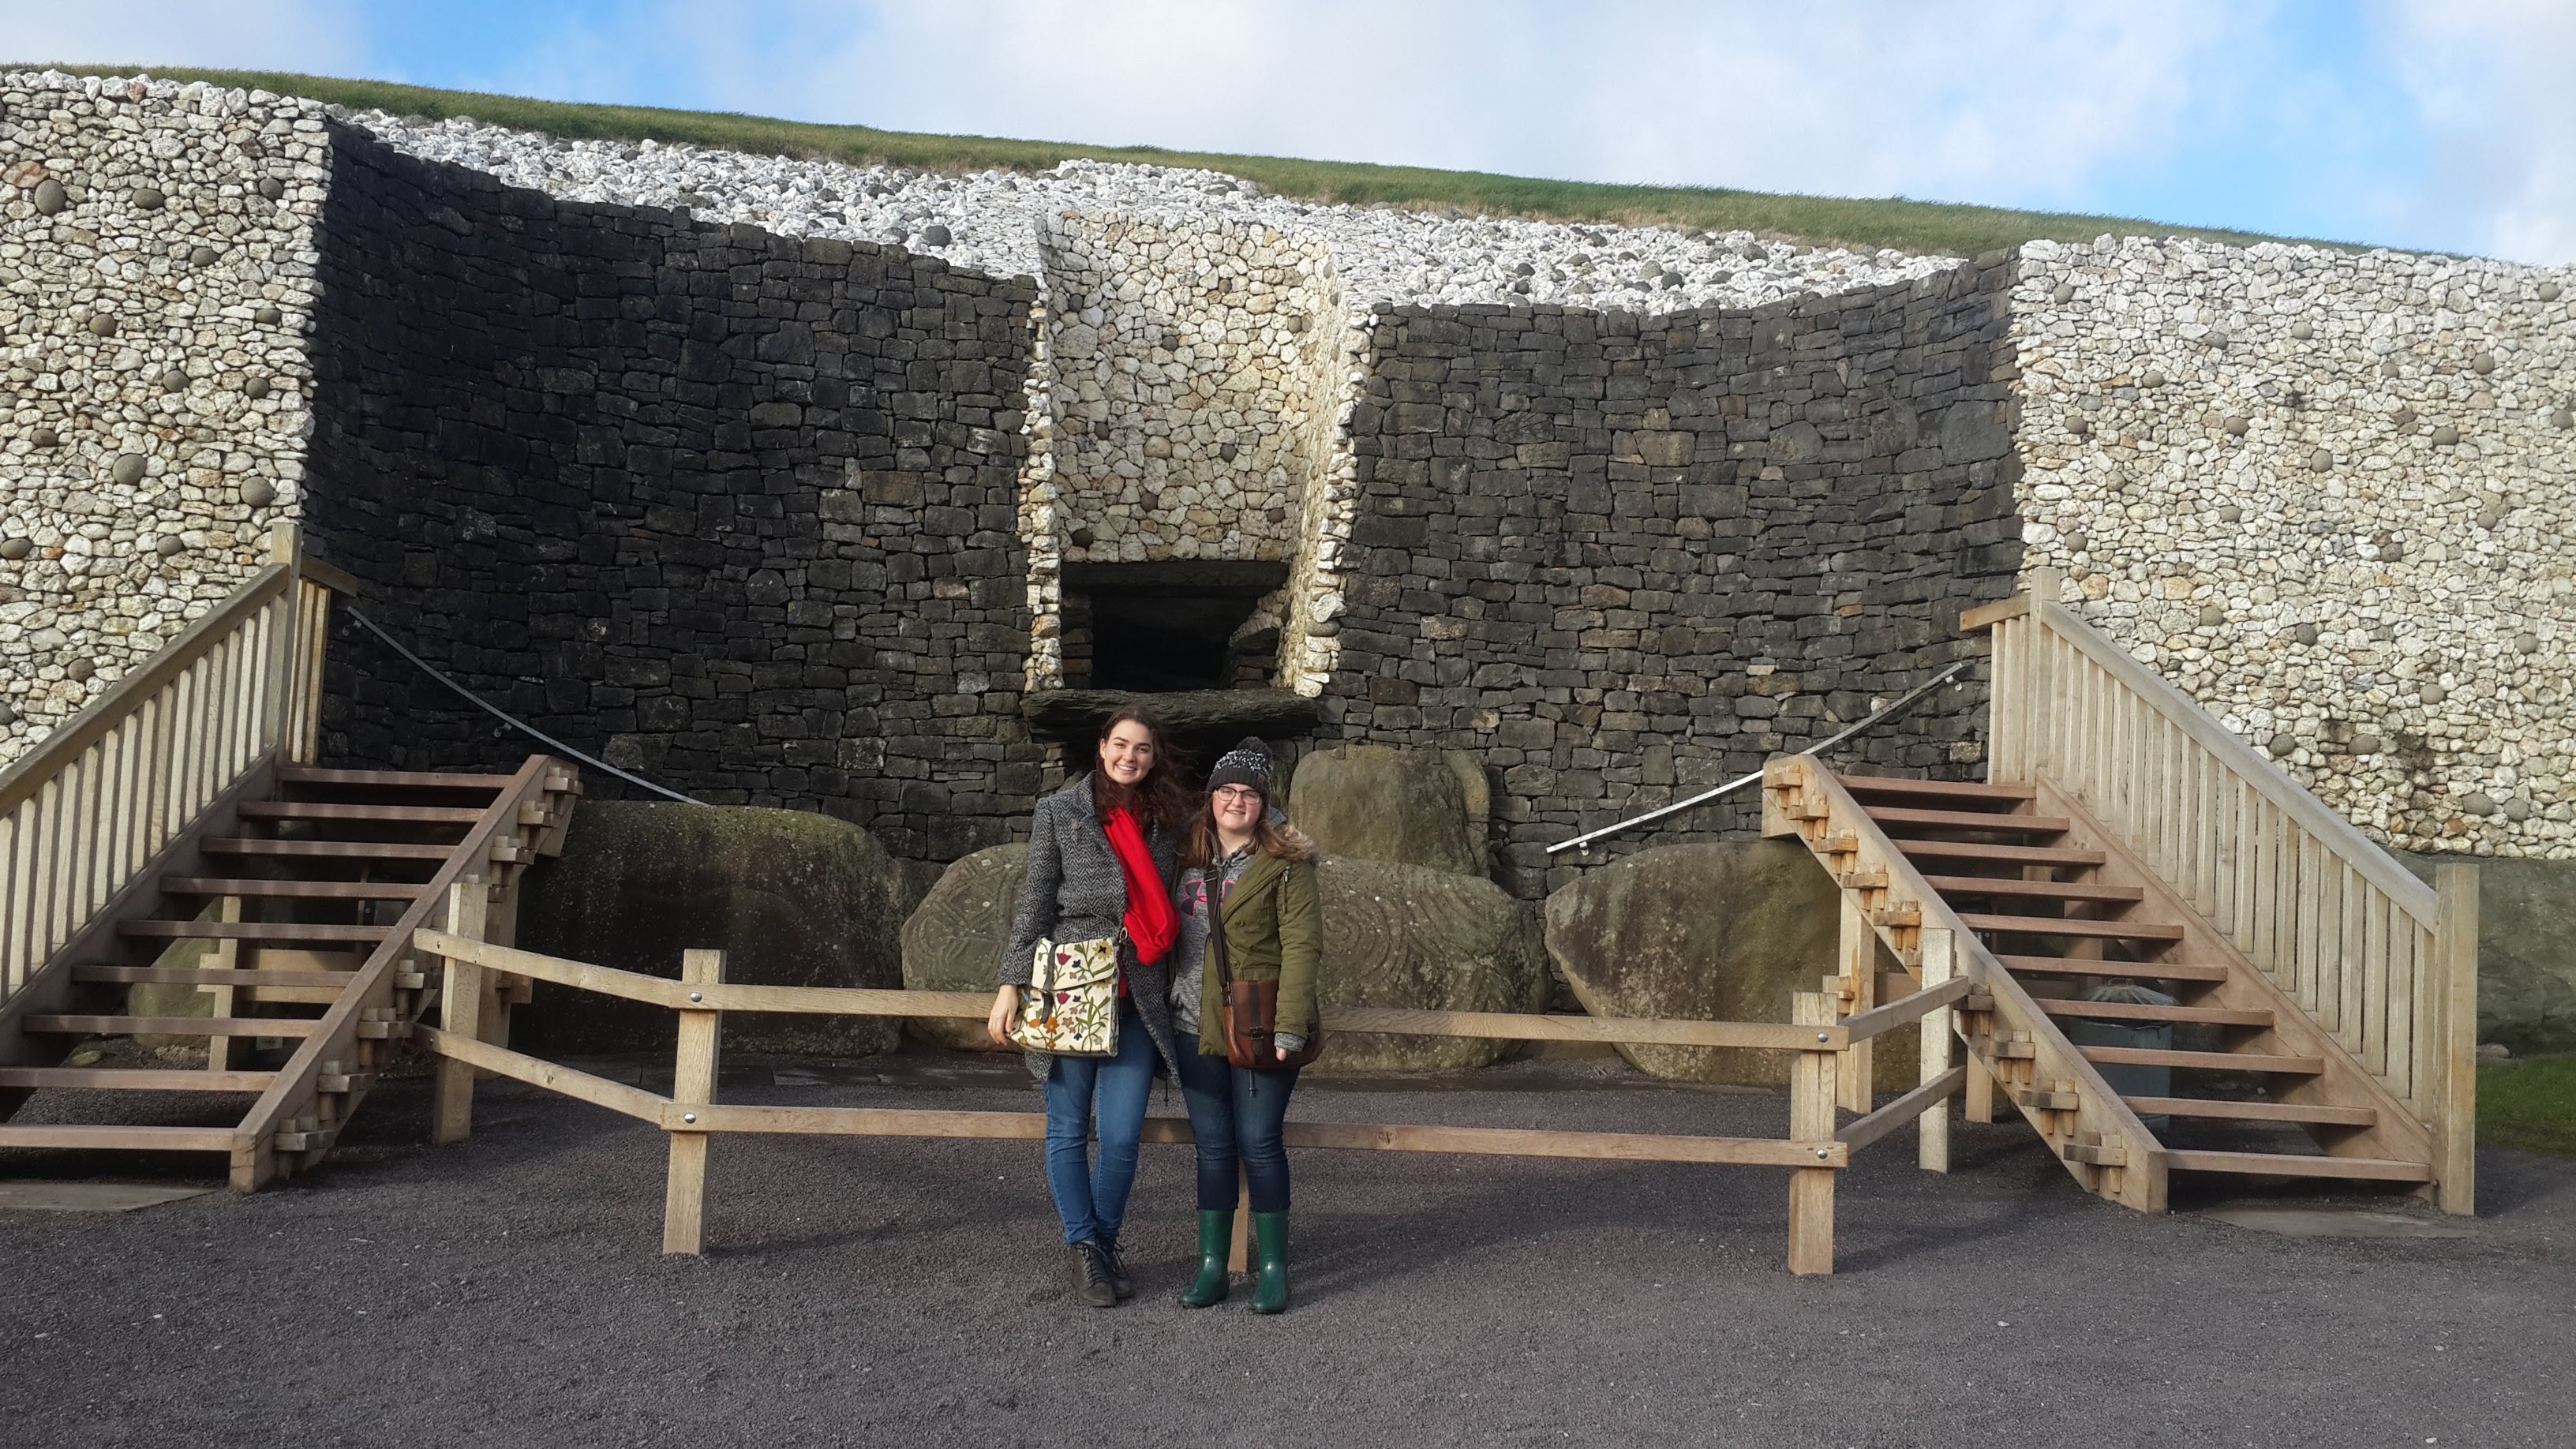 Bri and her friend Catherine standing infront of the white and grey stone entrance of Newgrange. The carved standing stone sits behind them.